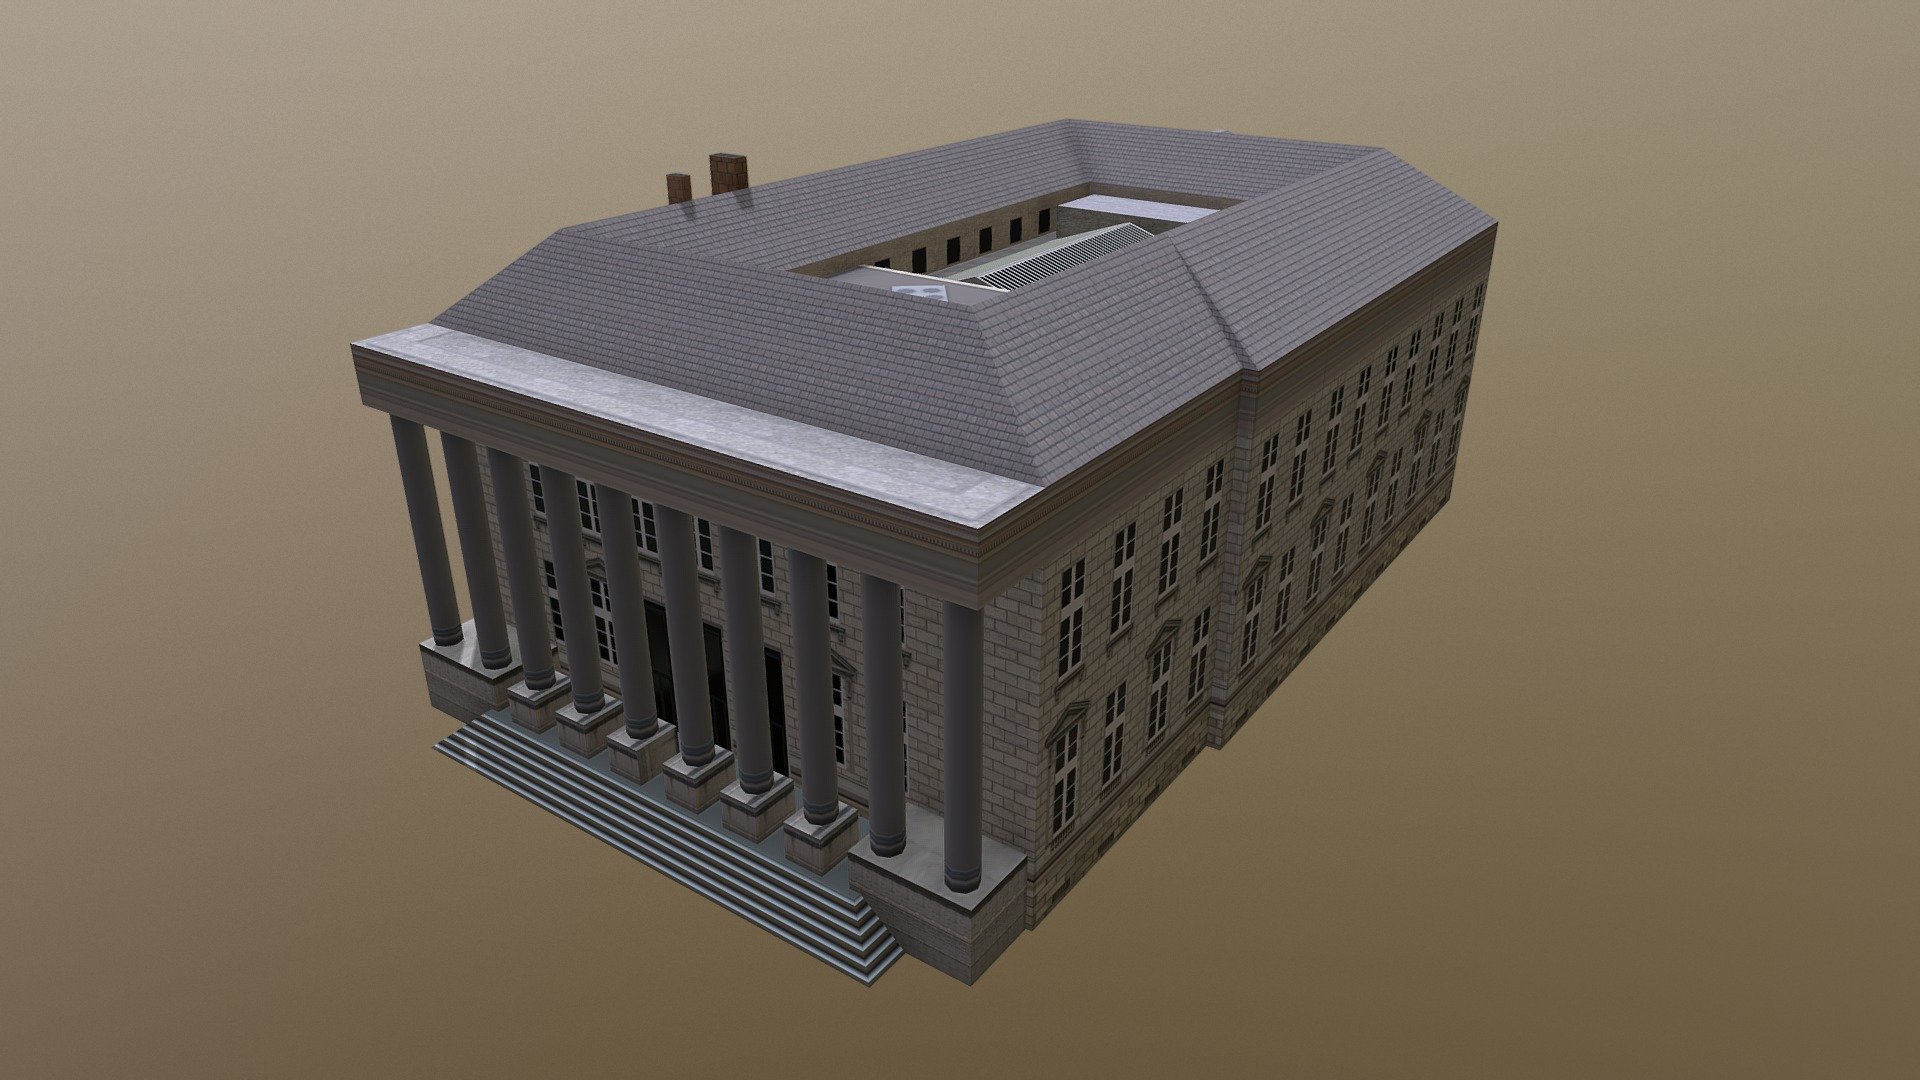 You can buy this 3D Model here - -link removed-  Low-Poly 3D Model of the Palais de la Bourse. This is a building on place du Commerce in Nantes, France, begun at the end of the 18th century and completed in the 19th century. It was rebuilt at the end of the 20th century to house a branch of Fnac 3d model